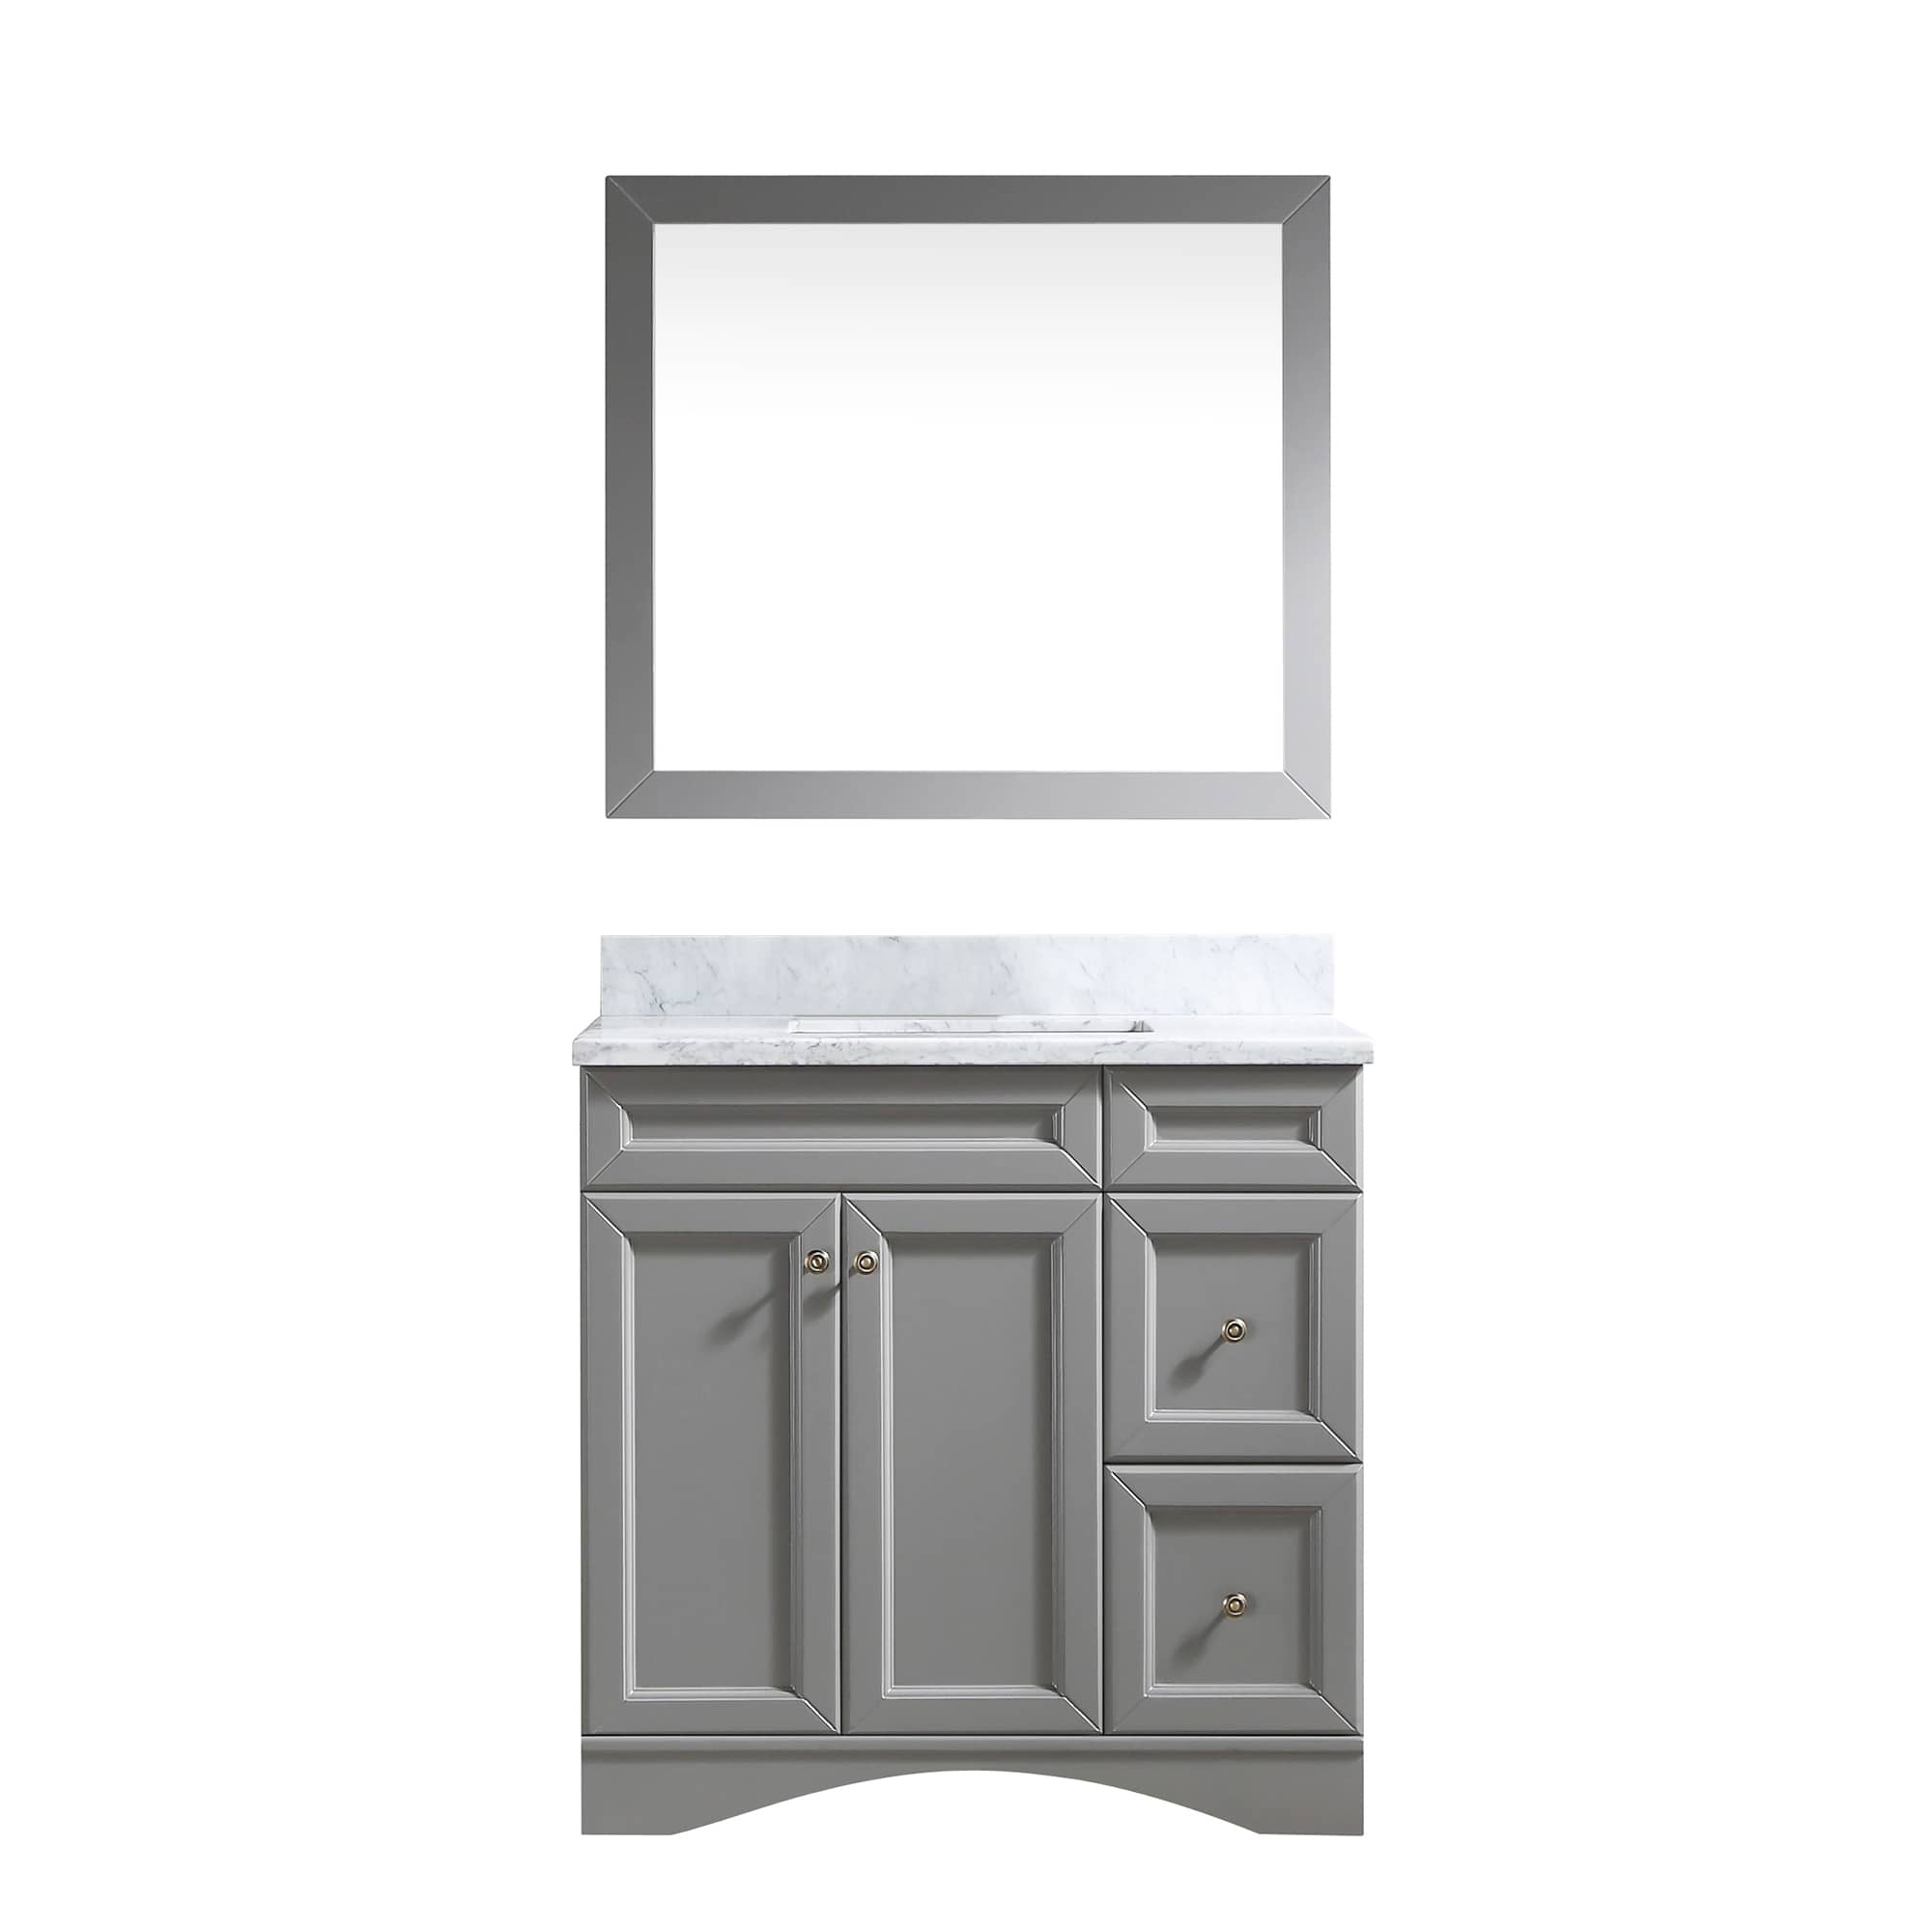 CASAINC 36 Inch Bath Vanity in Gray with White Top and Basin (36W x 22D x 35.4"H）-Casainc Canada